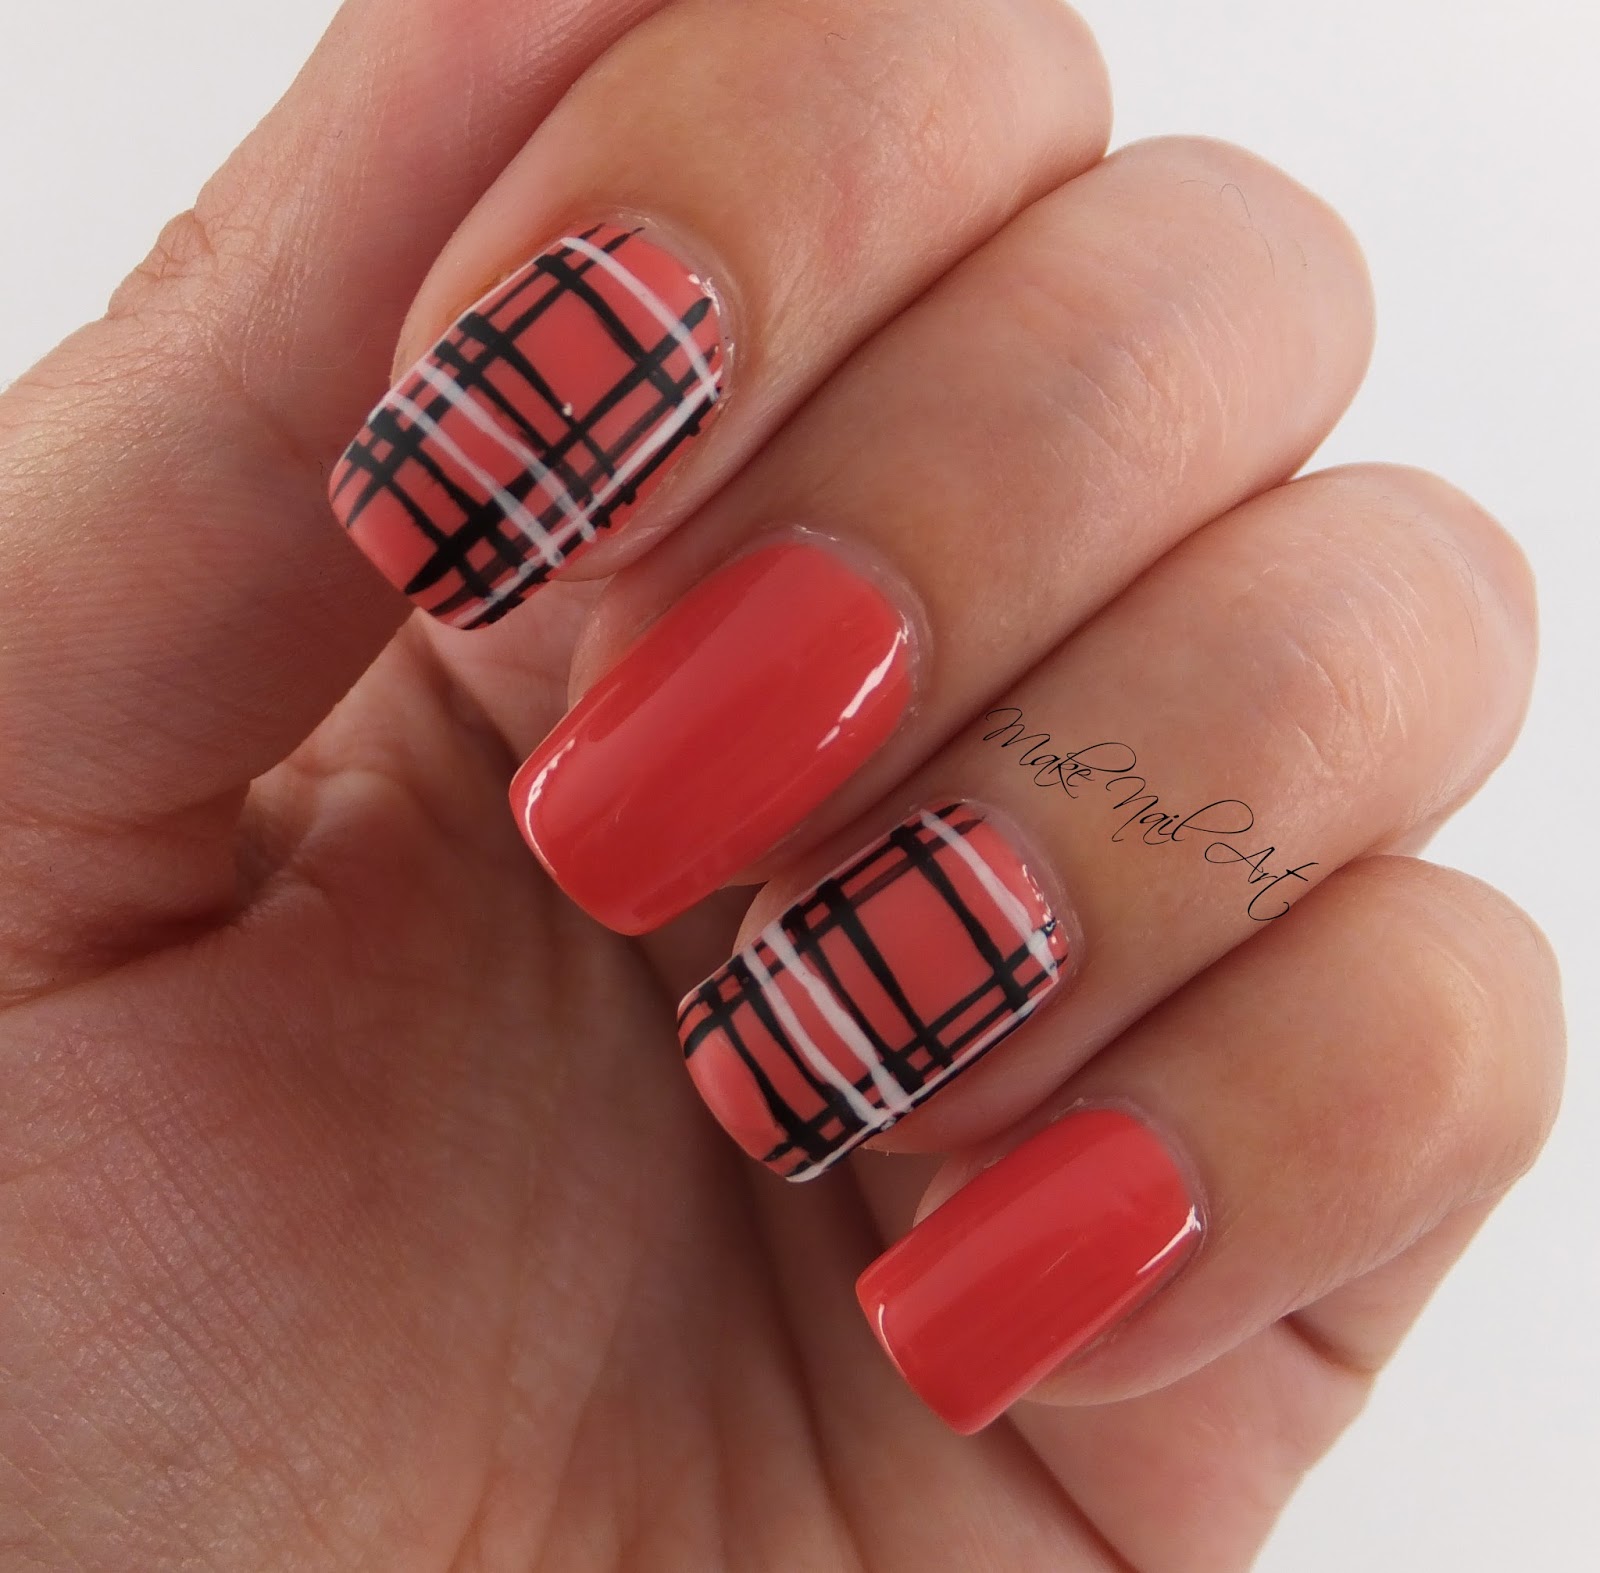 A hand with nails decorated with a plaid pattern in two contrasting colors